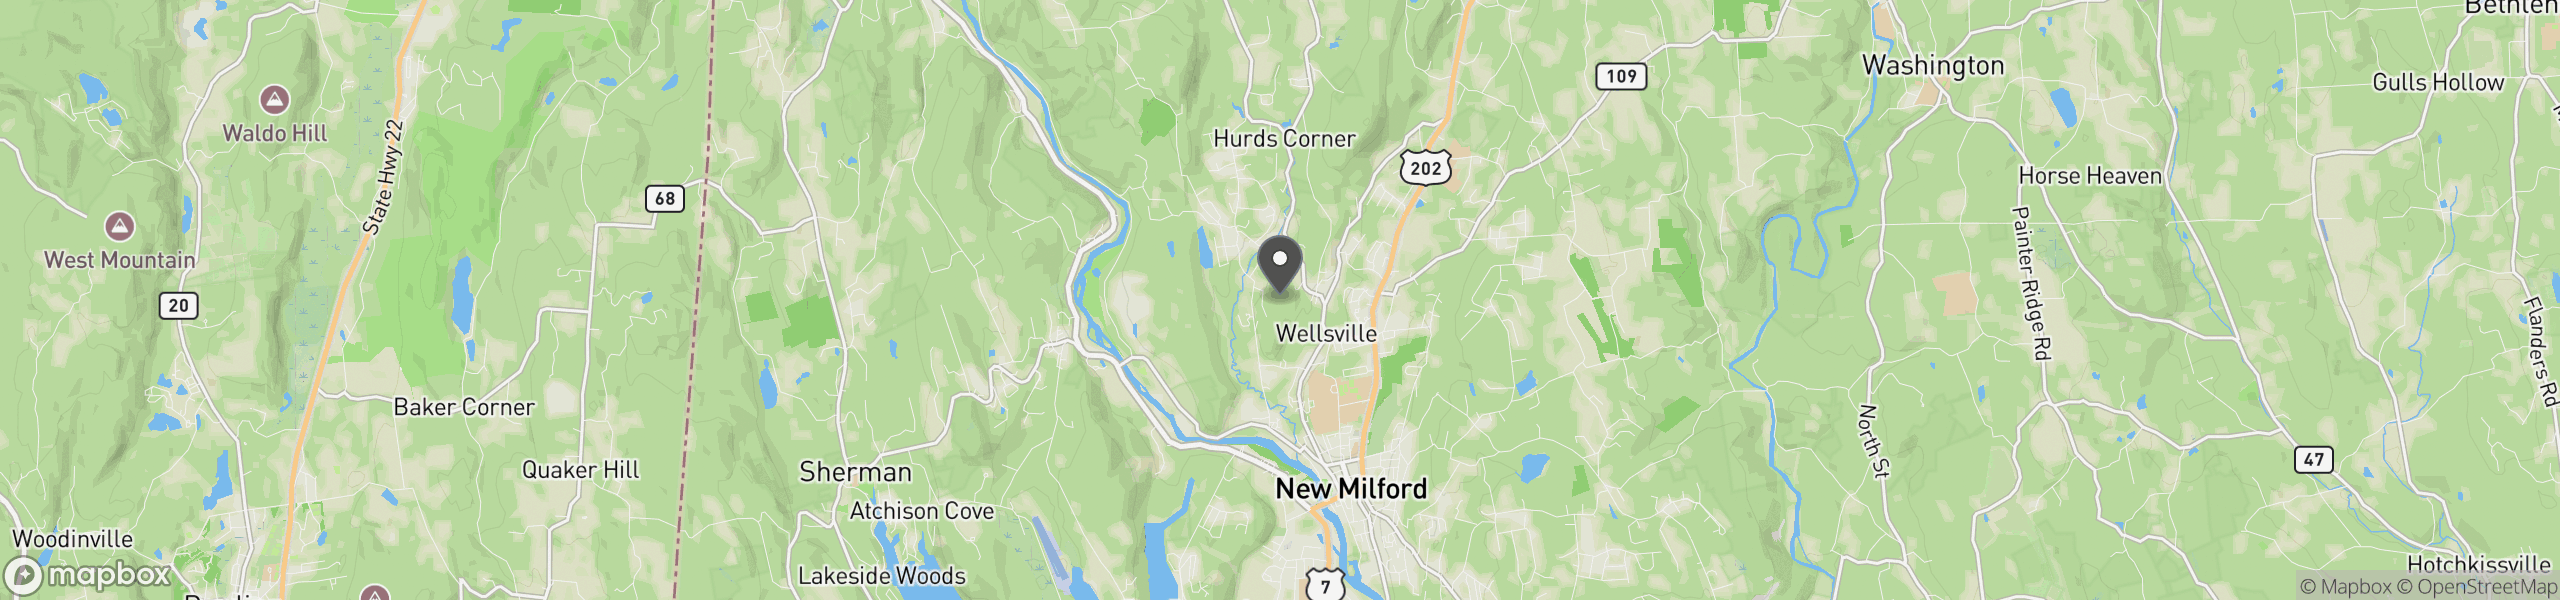 New Milford, CT 06776